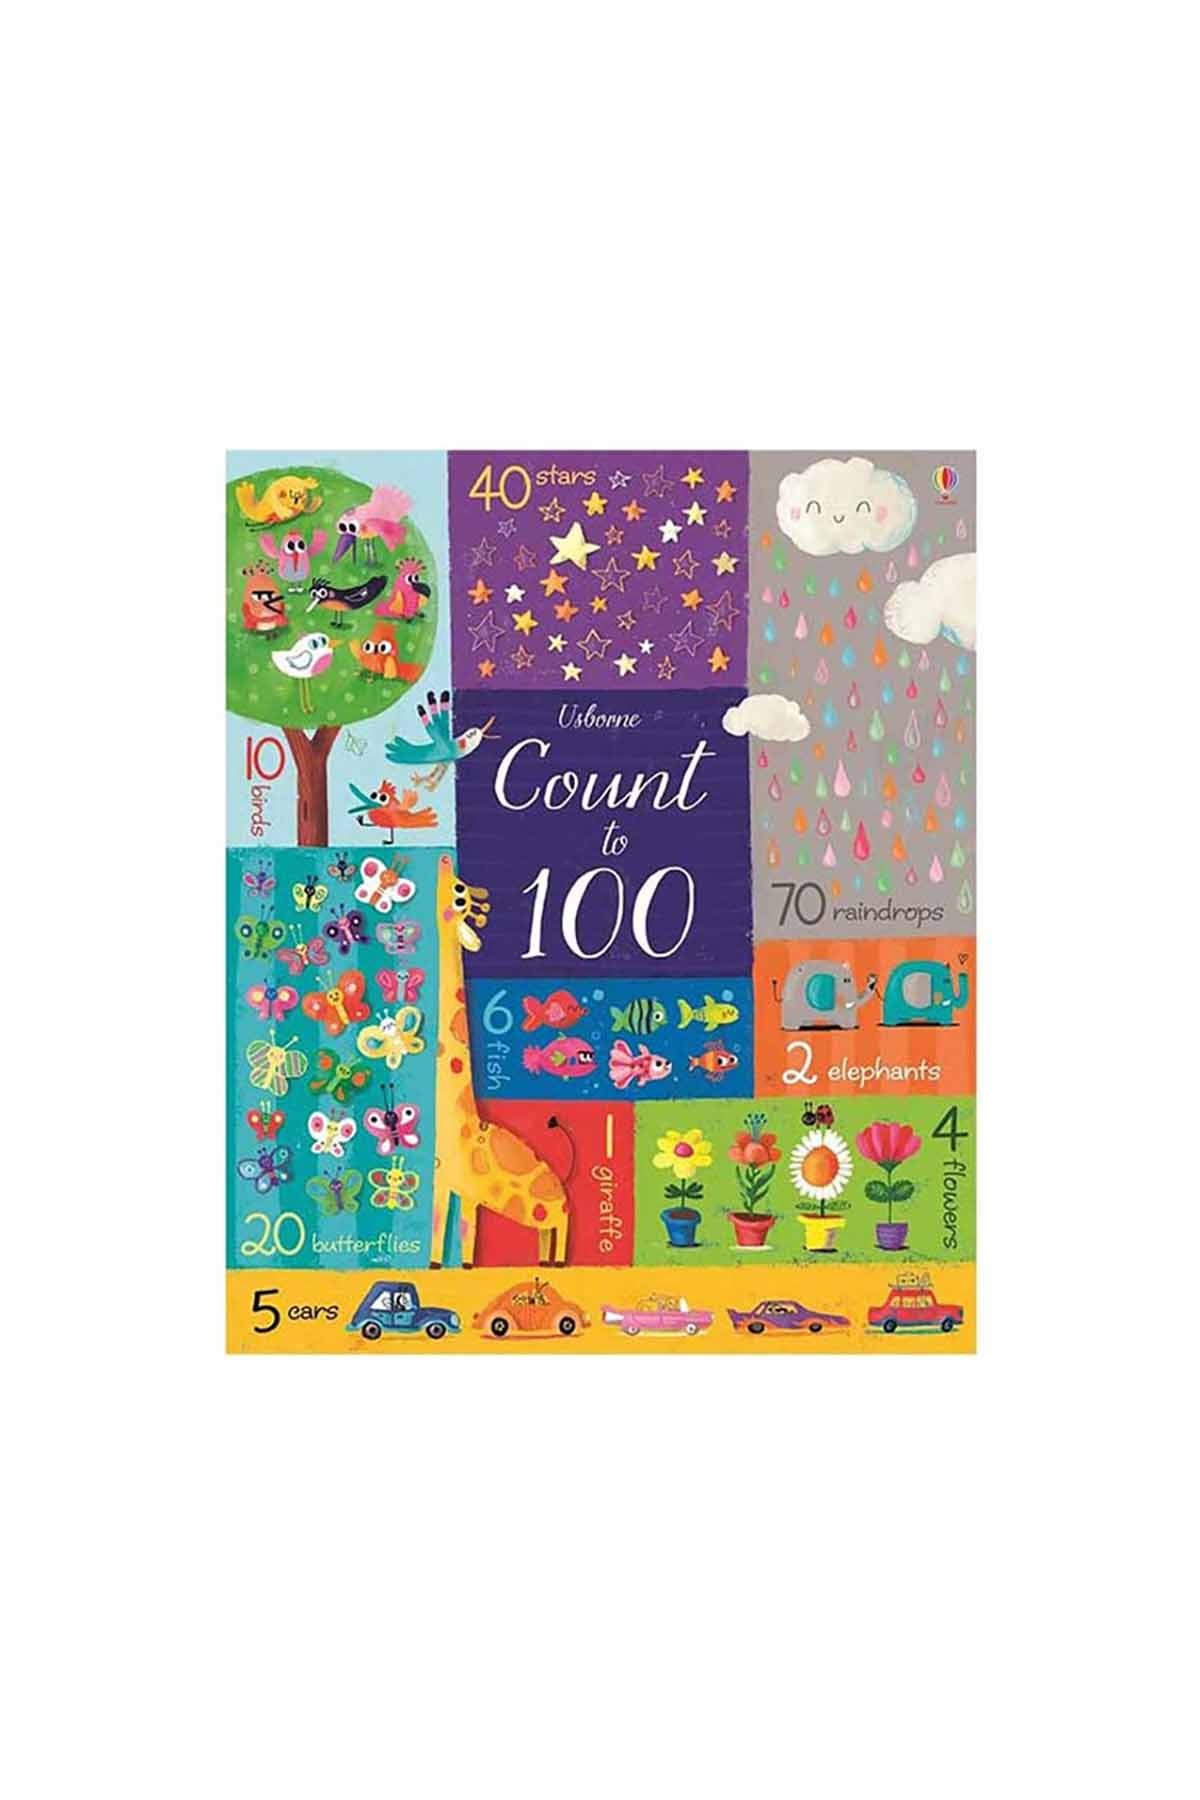 The Usborne Count to 100